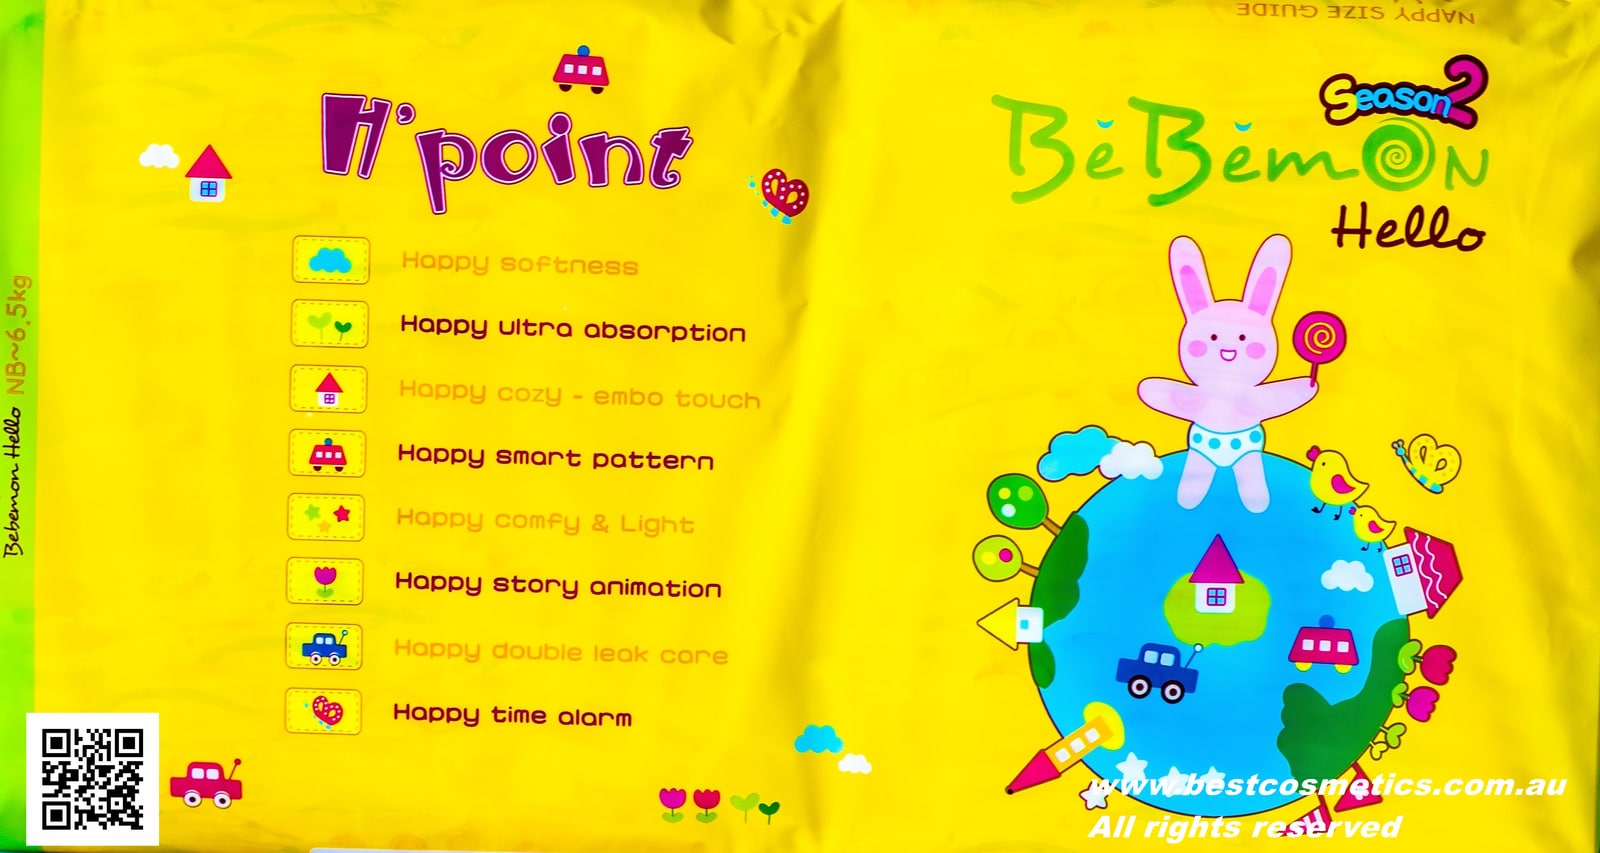 Size S for Newborn to 6.5 kg 1 Pack(50 PCs) of BeBeMon Nappy(Manufactured in 2016)